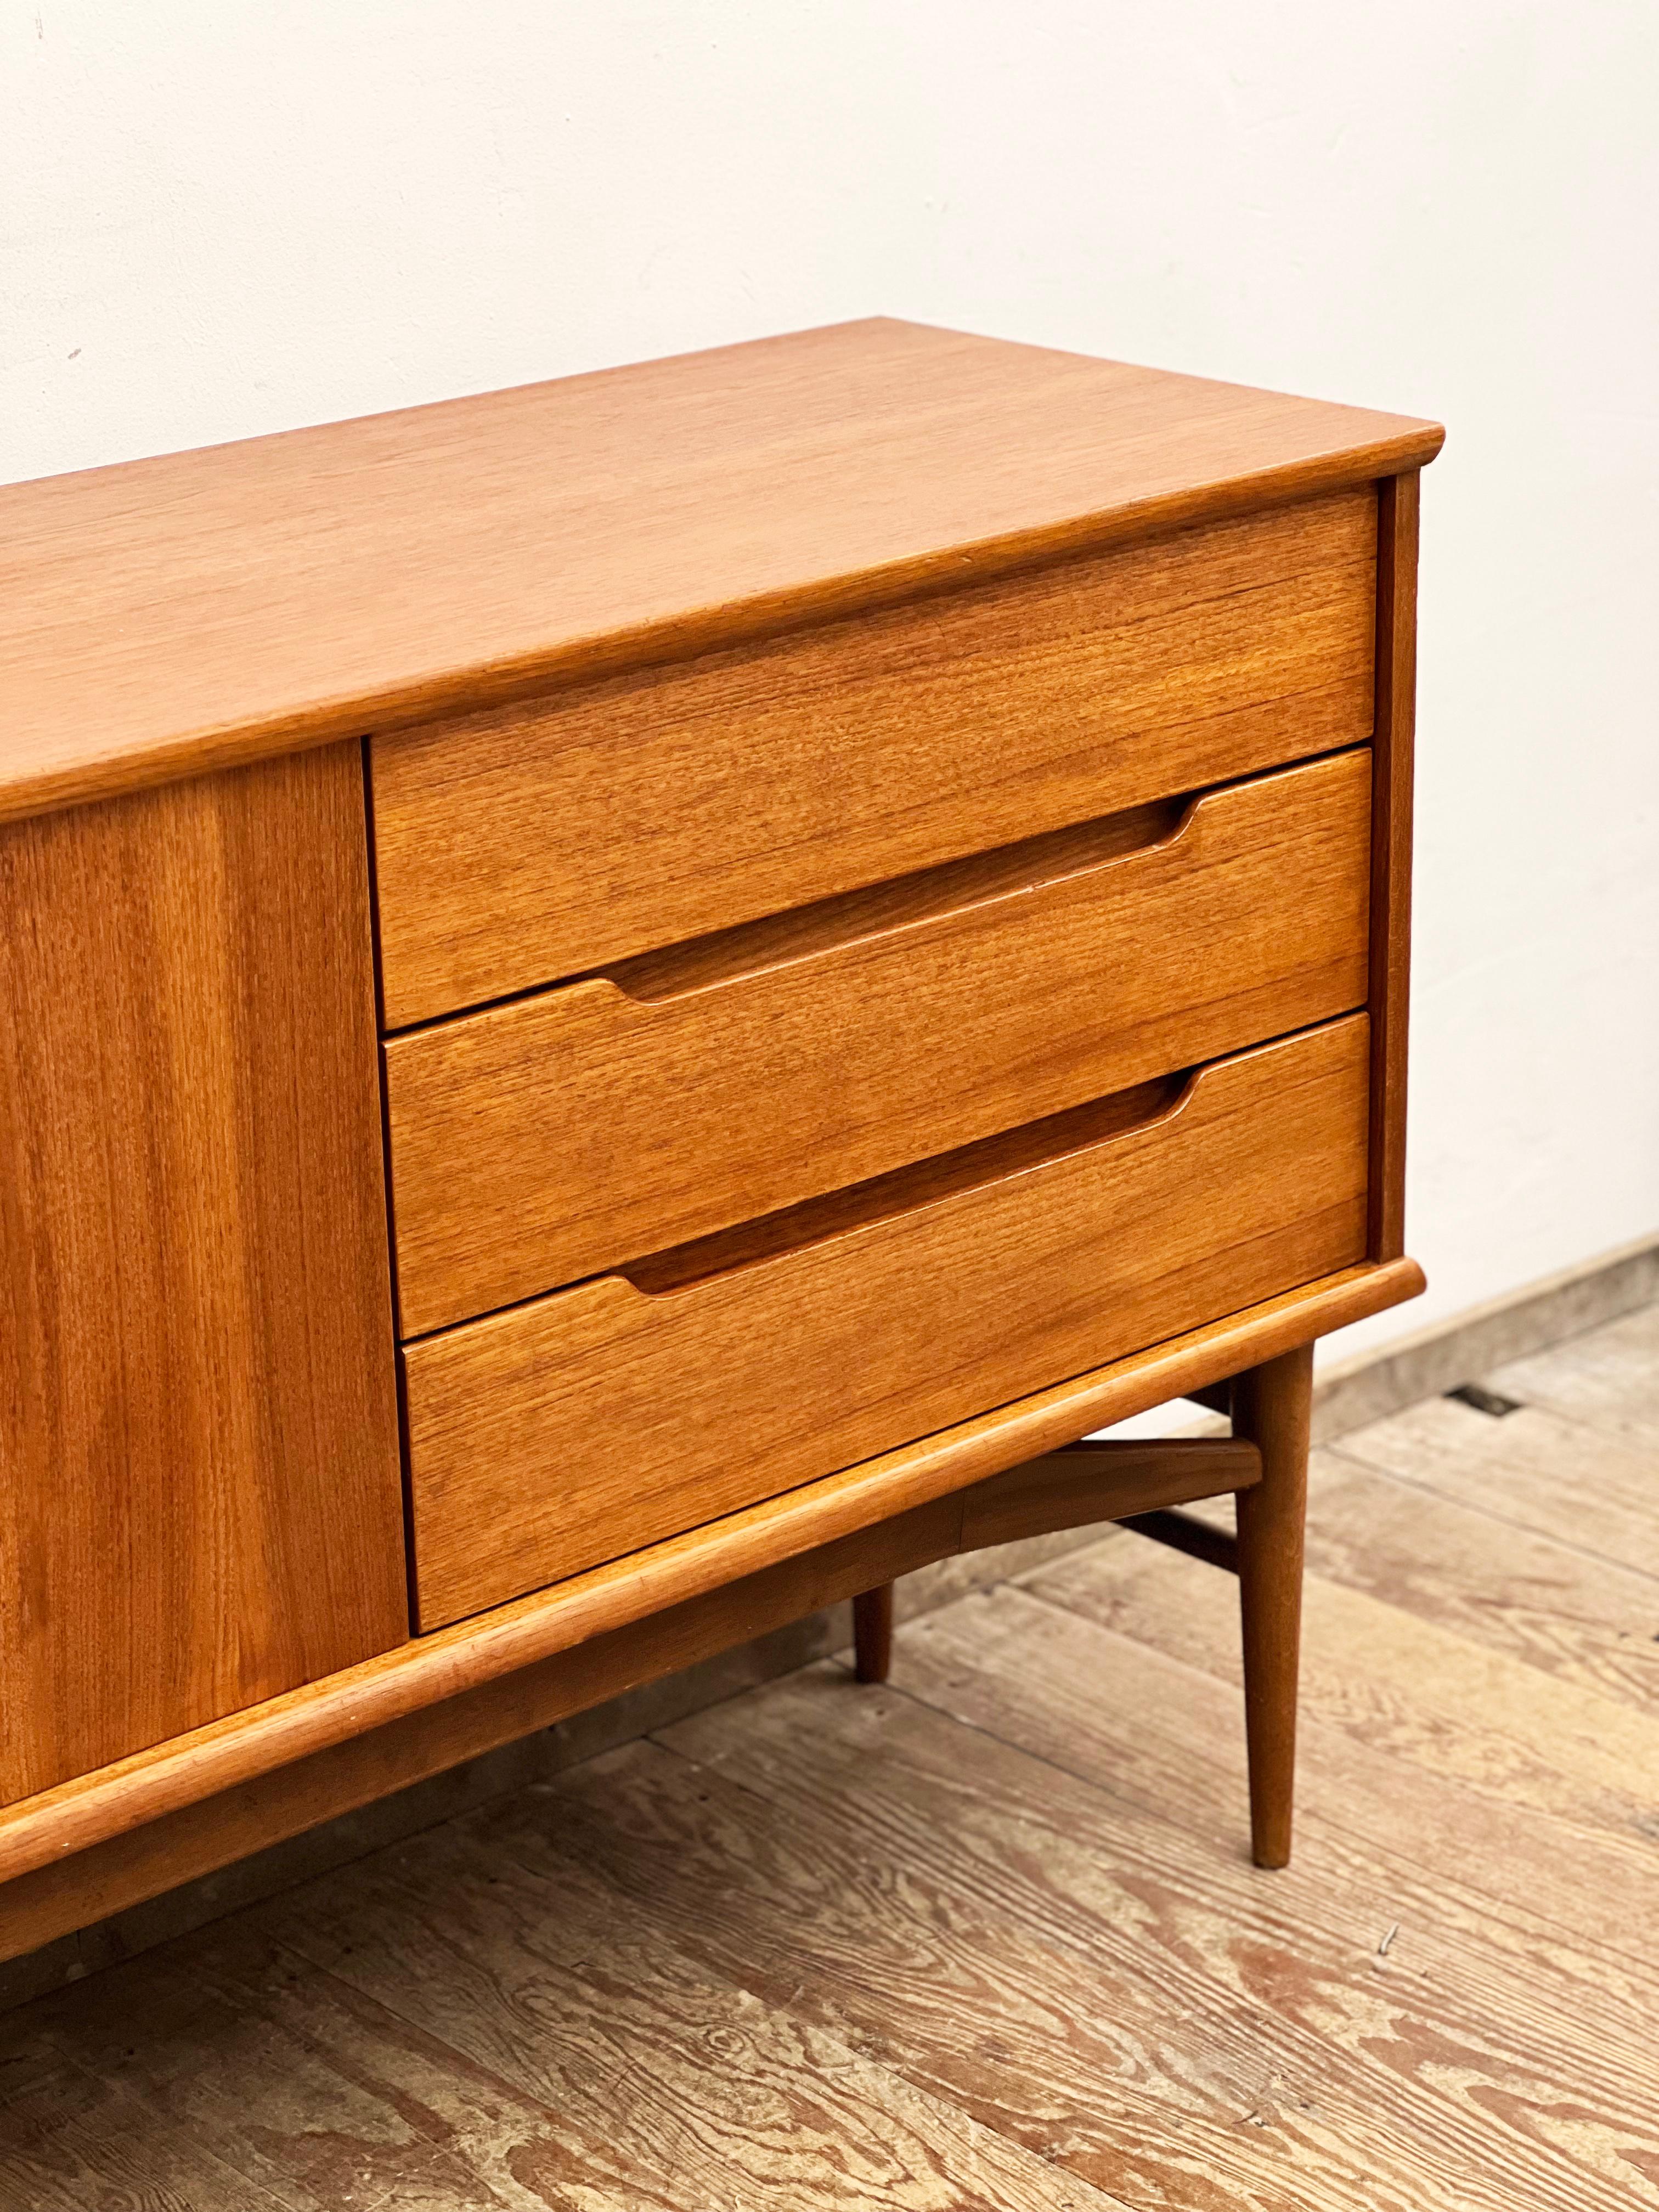 Small Mid-Century Modern Fredericia Sideboard in Teak, Germany, 1950s For Sale 2